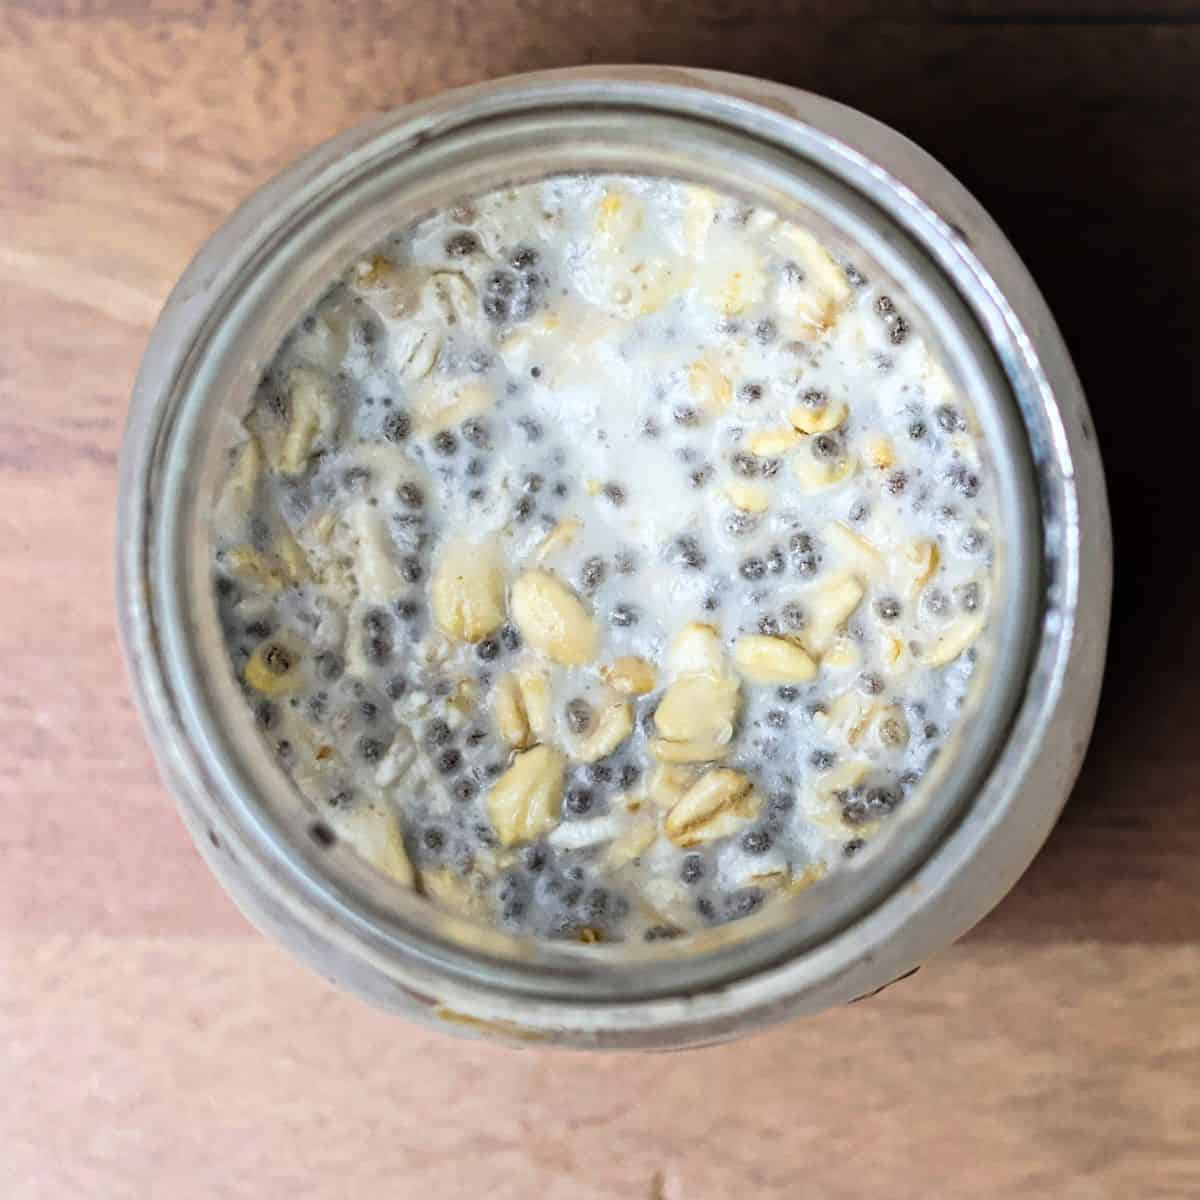 A glass jar with a mixed combination of overnight oats ingredients, including coconut milk, before the refrigeration process.